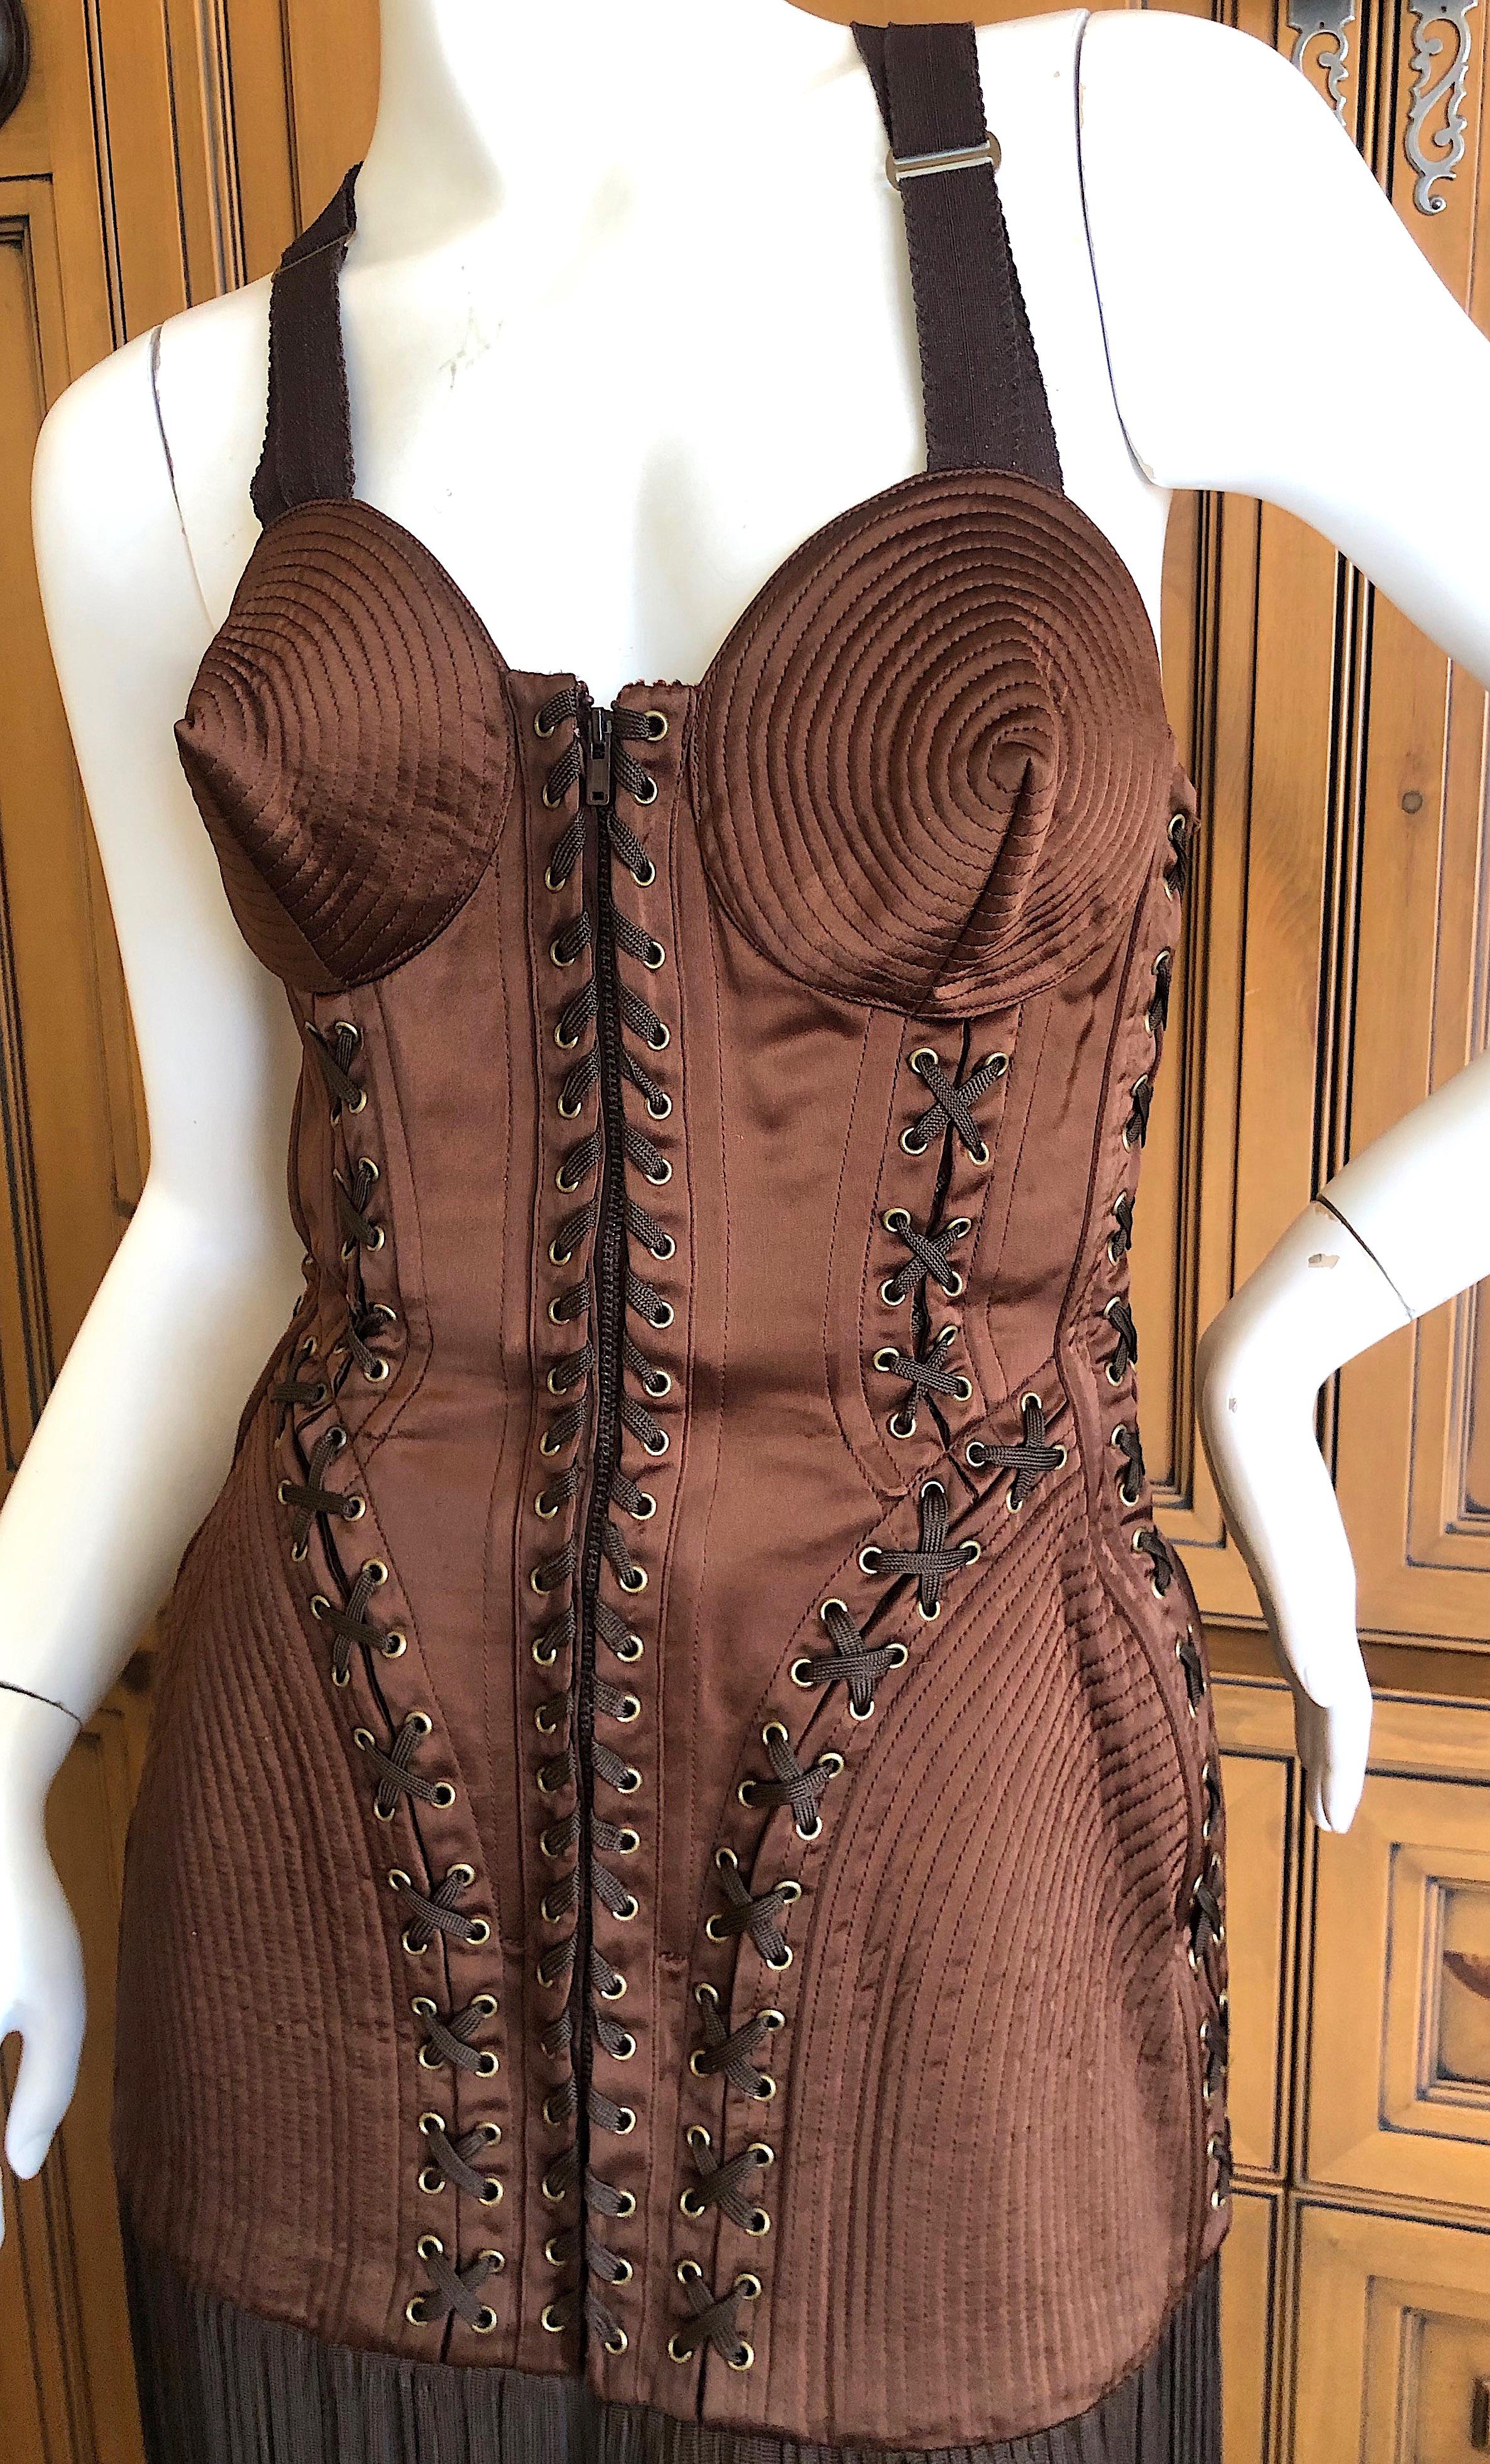 Jean Paul Gaultier Iconic 1989  Cone Bra Corset with Fringe
This is a really rare 1989 corset dress, which was made in gold for Madonna's Blond Ambition tour, in which she famously performed 